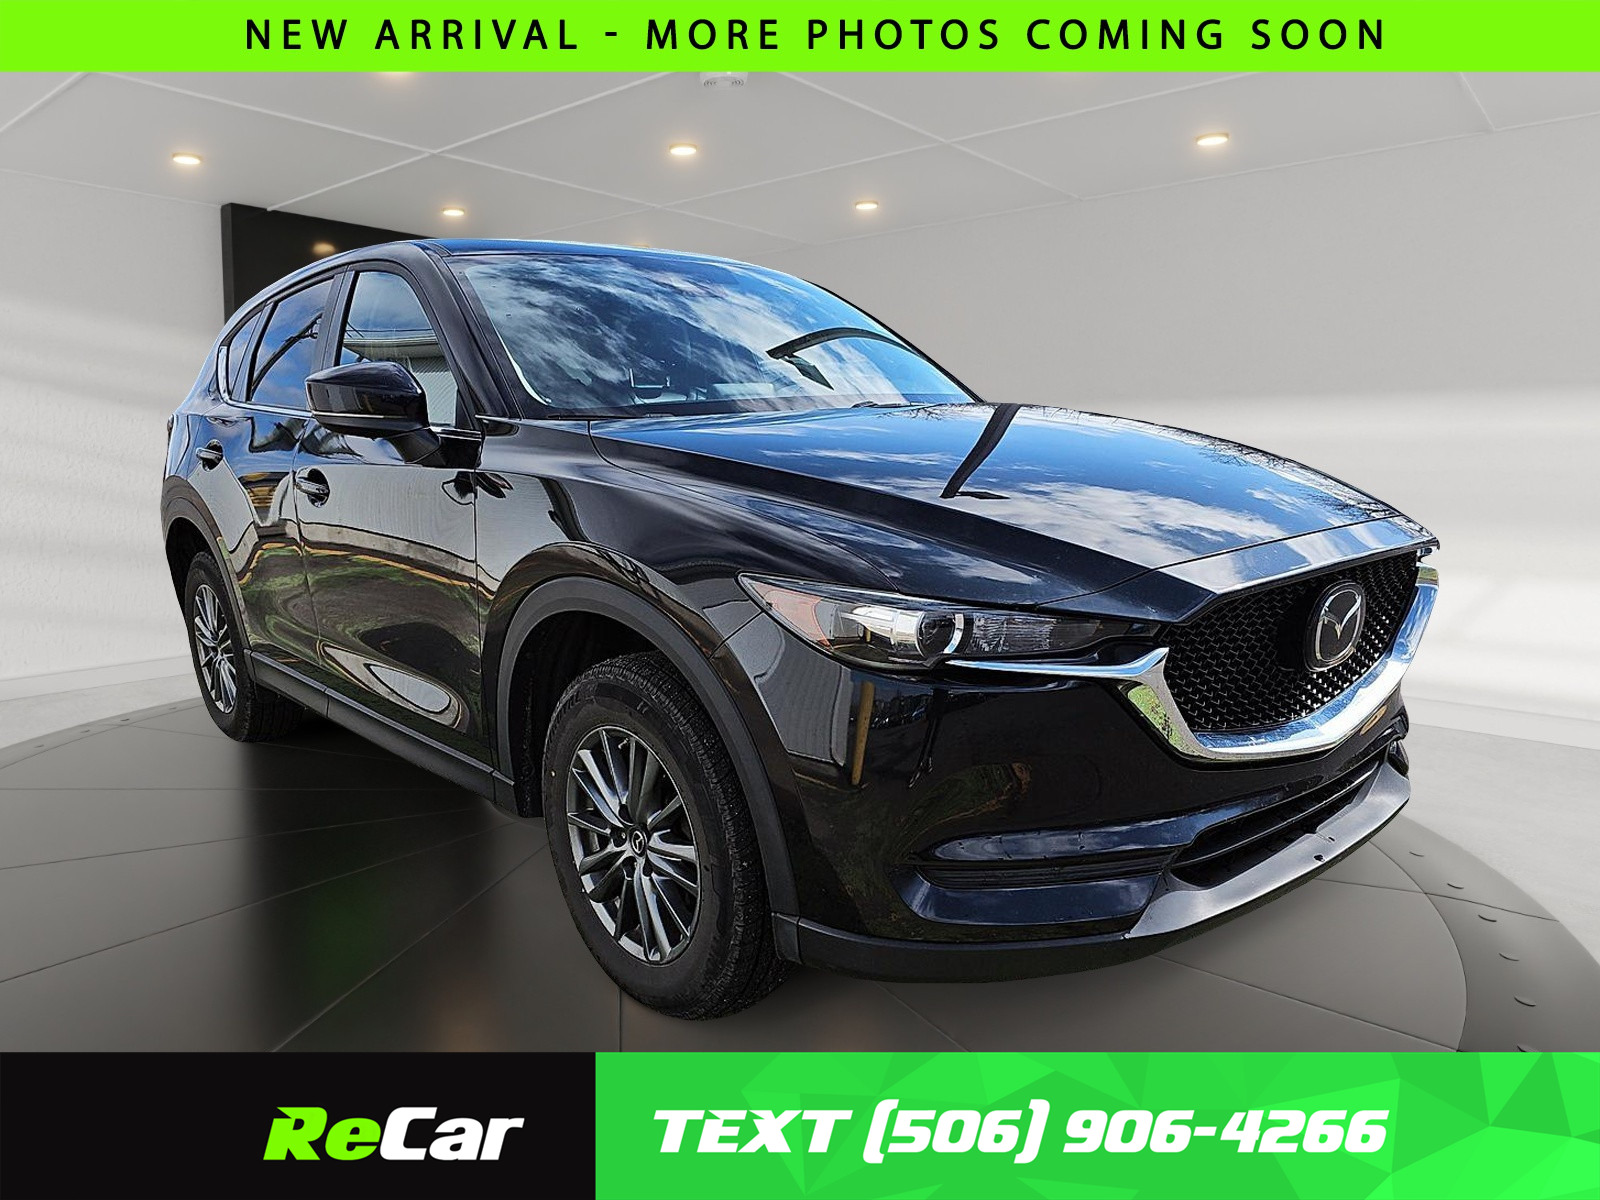 2017 Mazda CX-5 Heated Seats | Bluetooth Connection | AWD